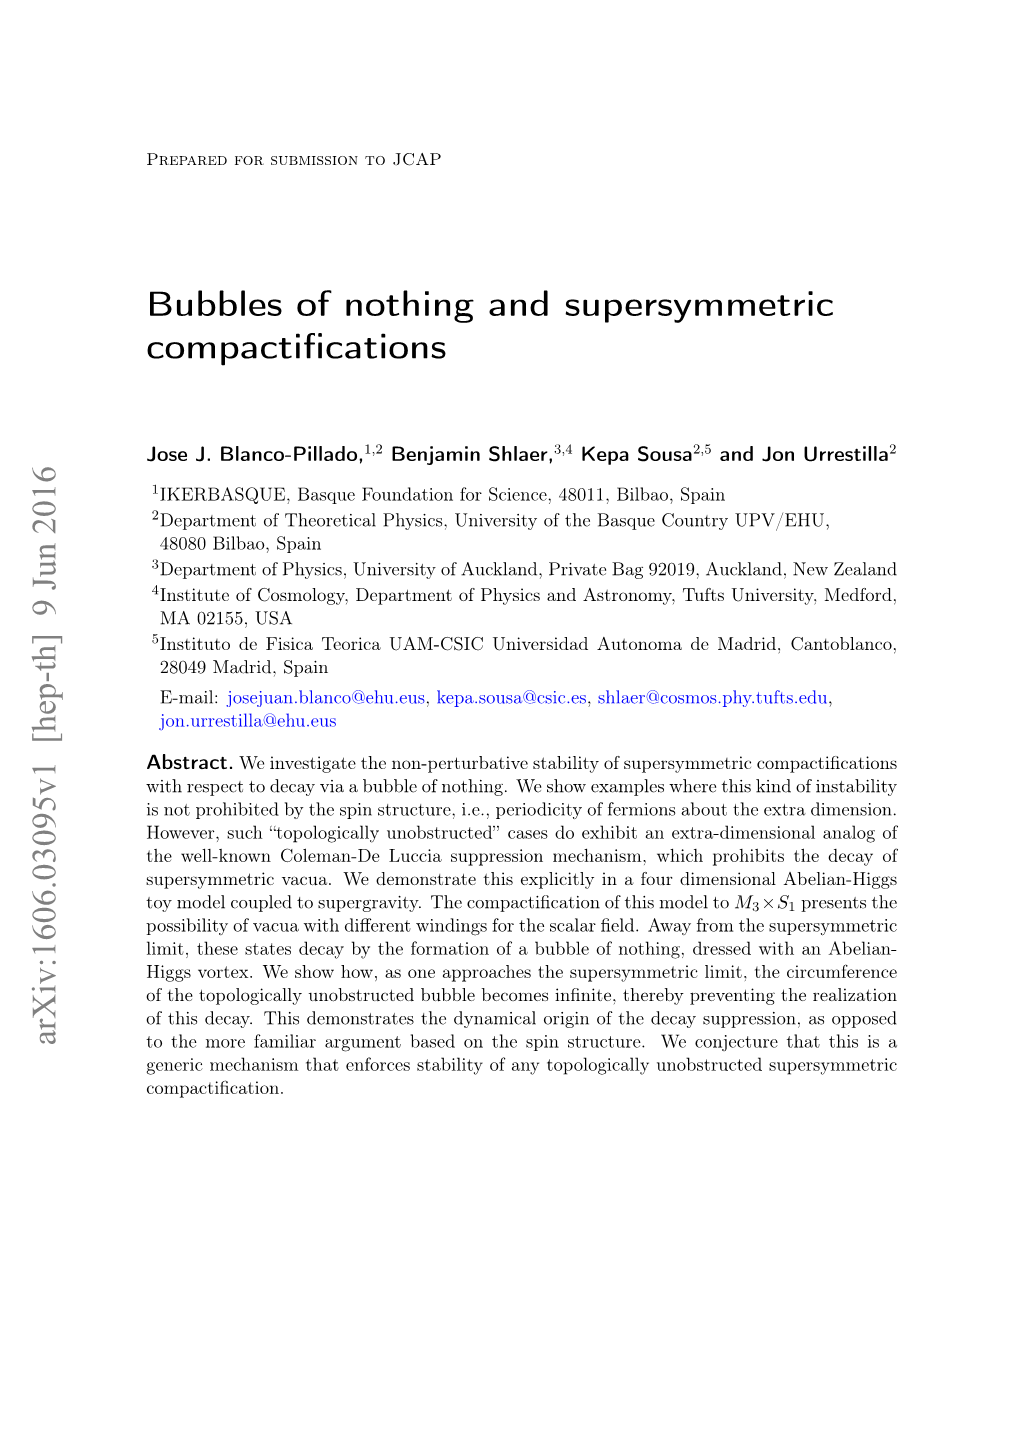 Bubbles of Nothing and Supersymmetric Compactifications